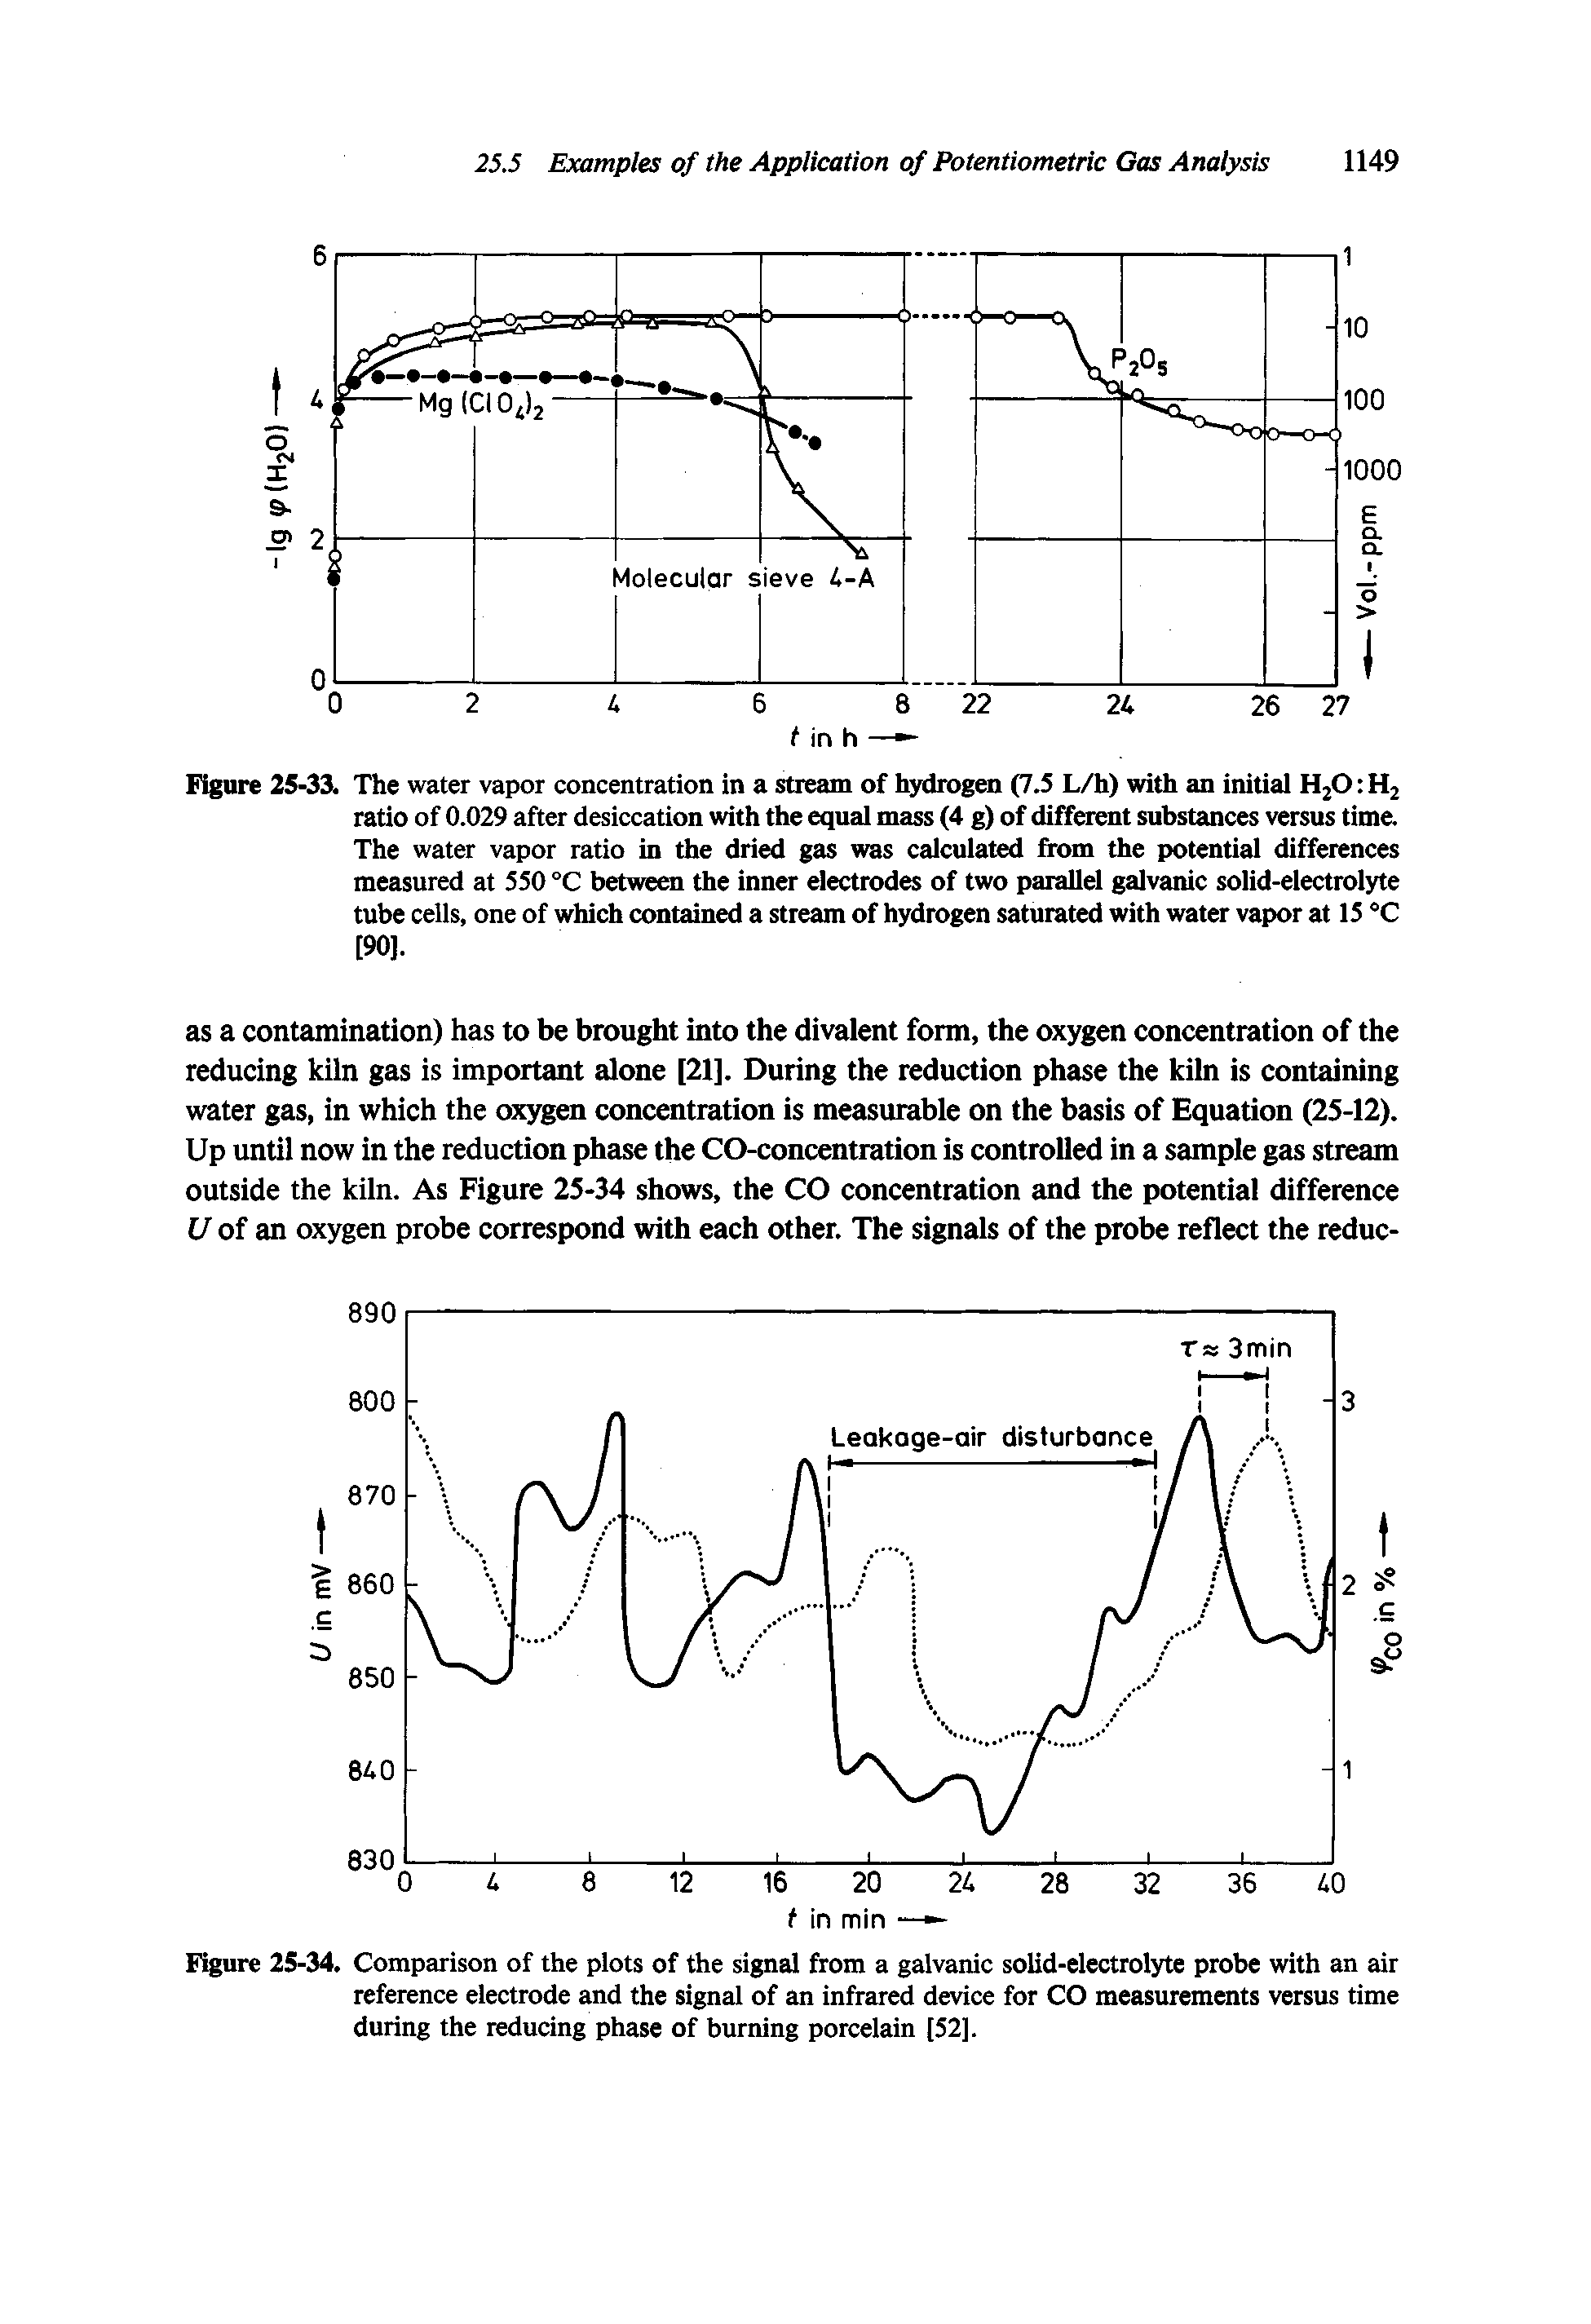 Figure 25-34. Comparison of the plots of the signal from a galvanic solid-electrolyte probe with an air reference electrode and the signal of an infrared device for CO measurements versus time during the reducing phase of burning porcelain [52].